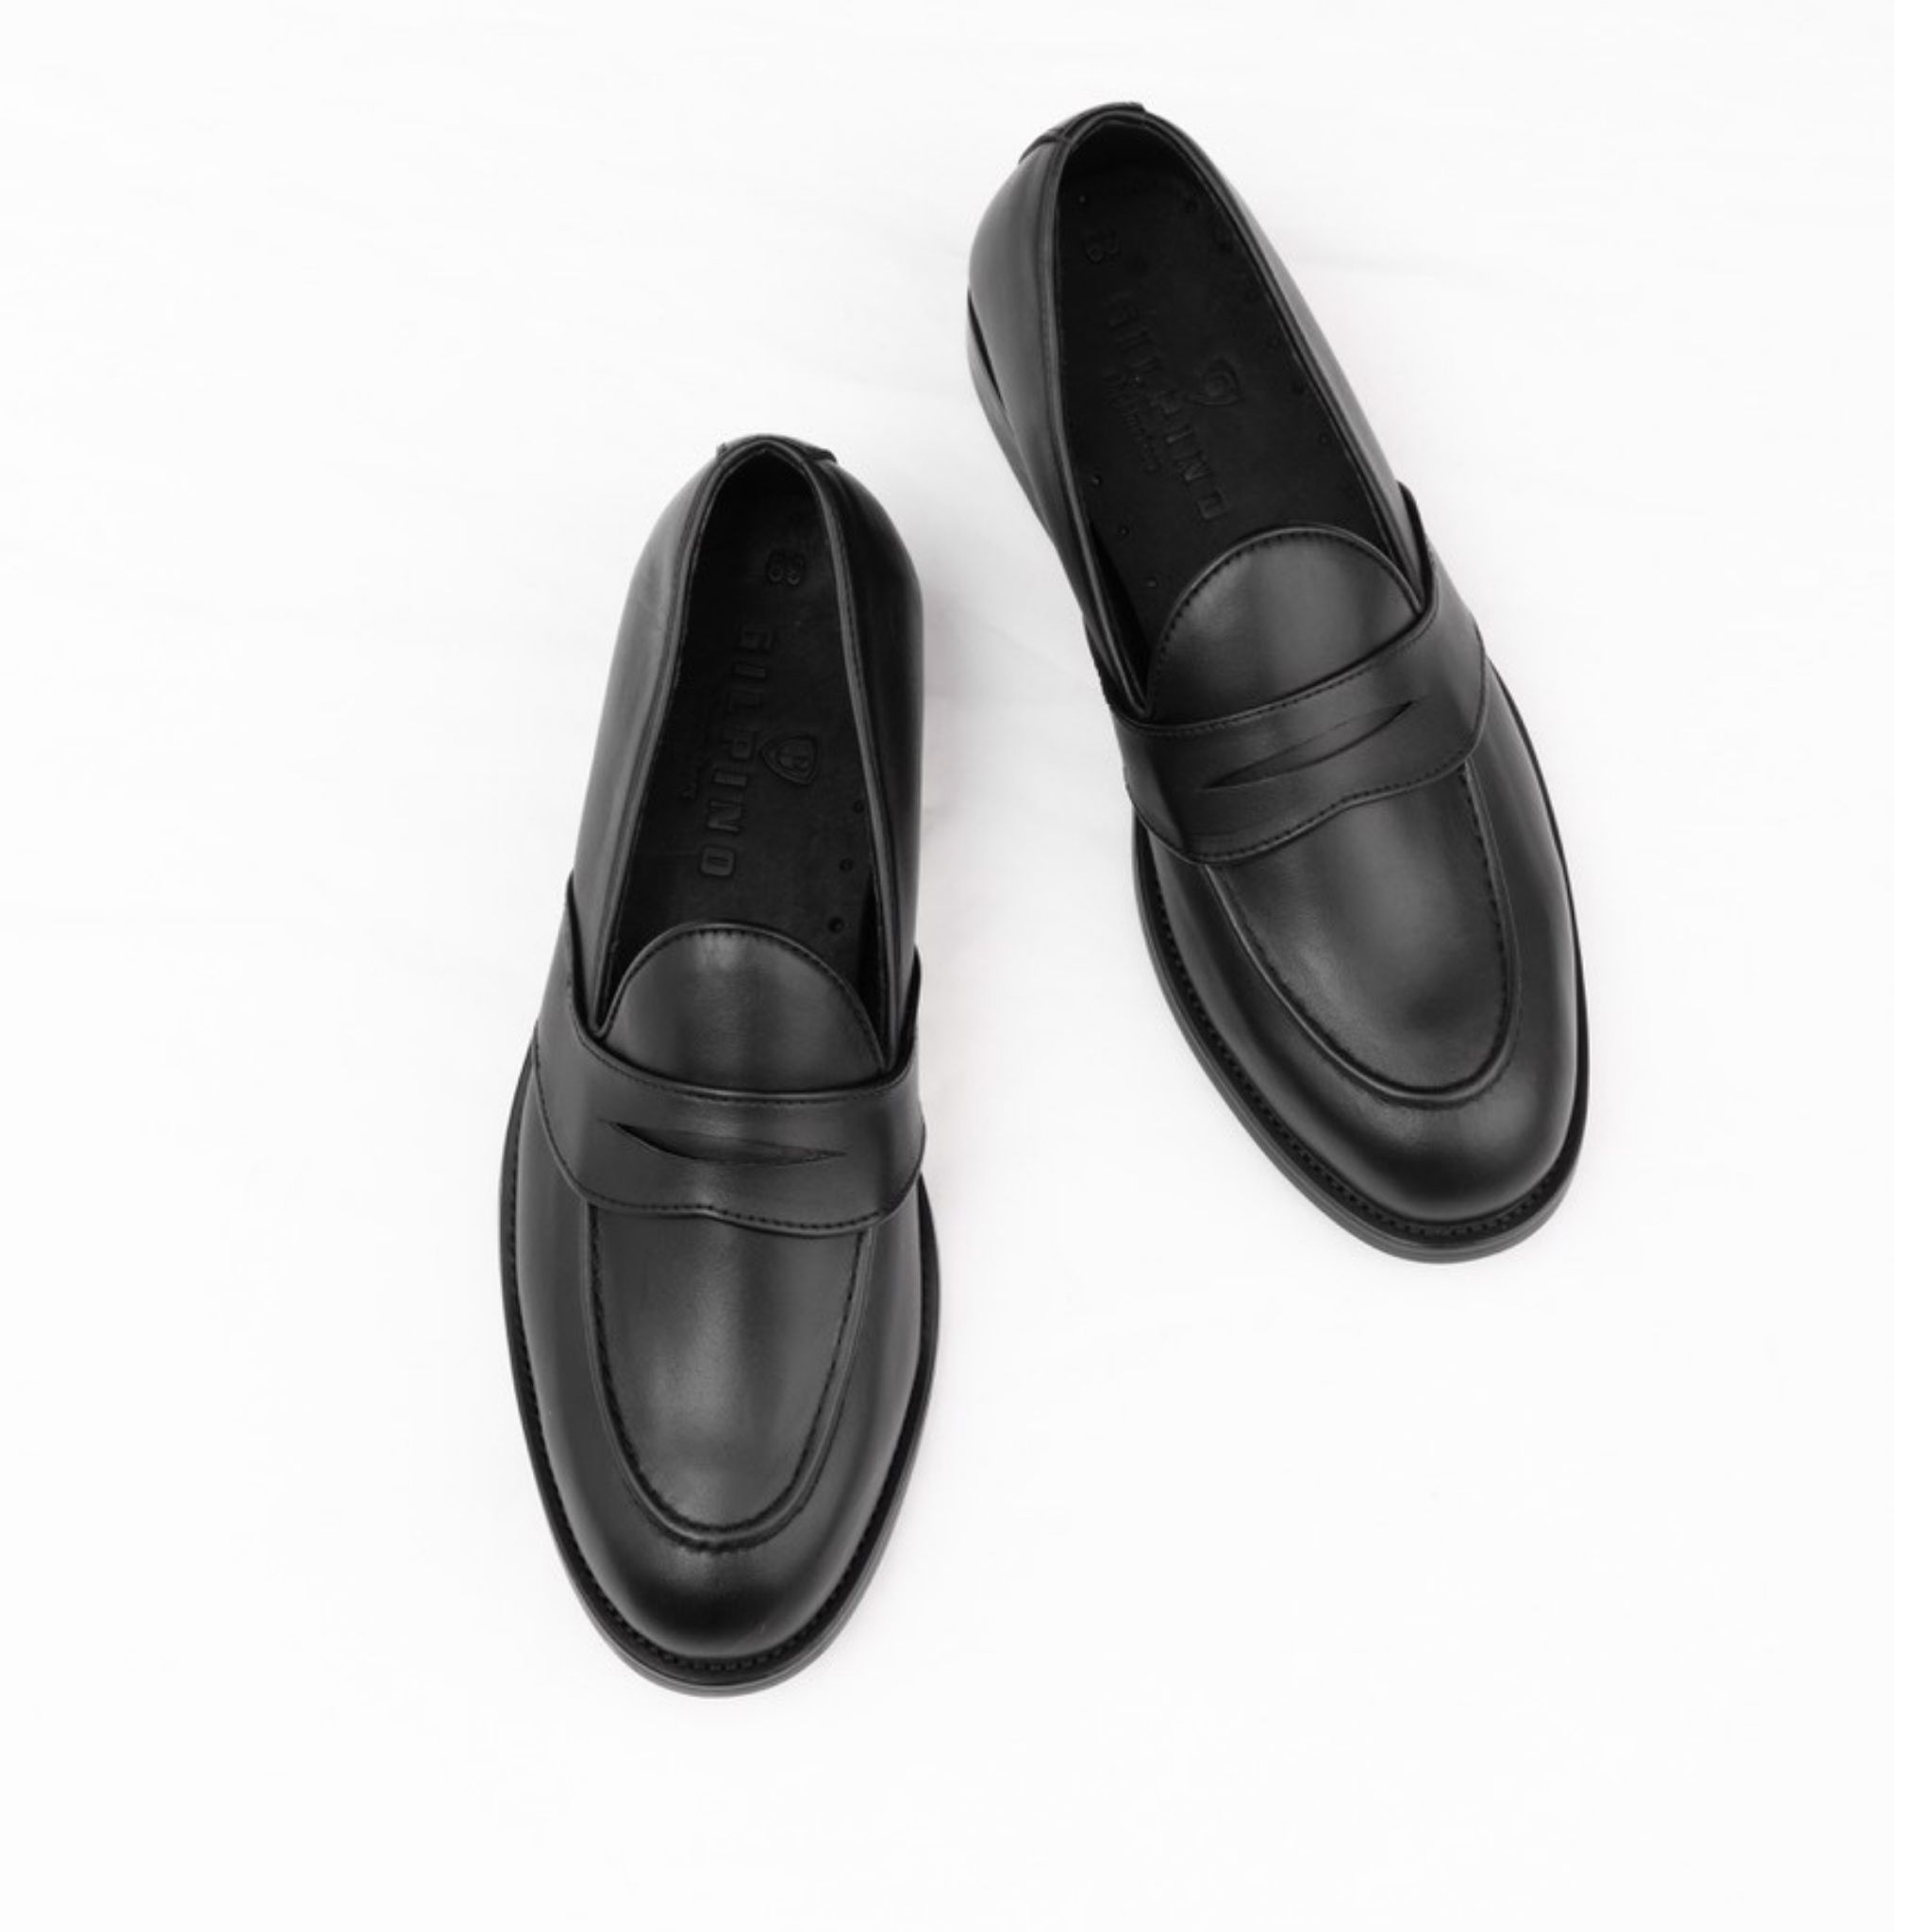 Wing 01 - Loafers black